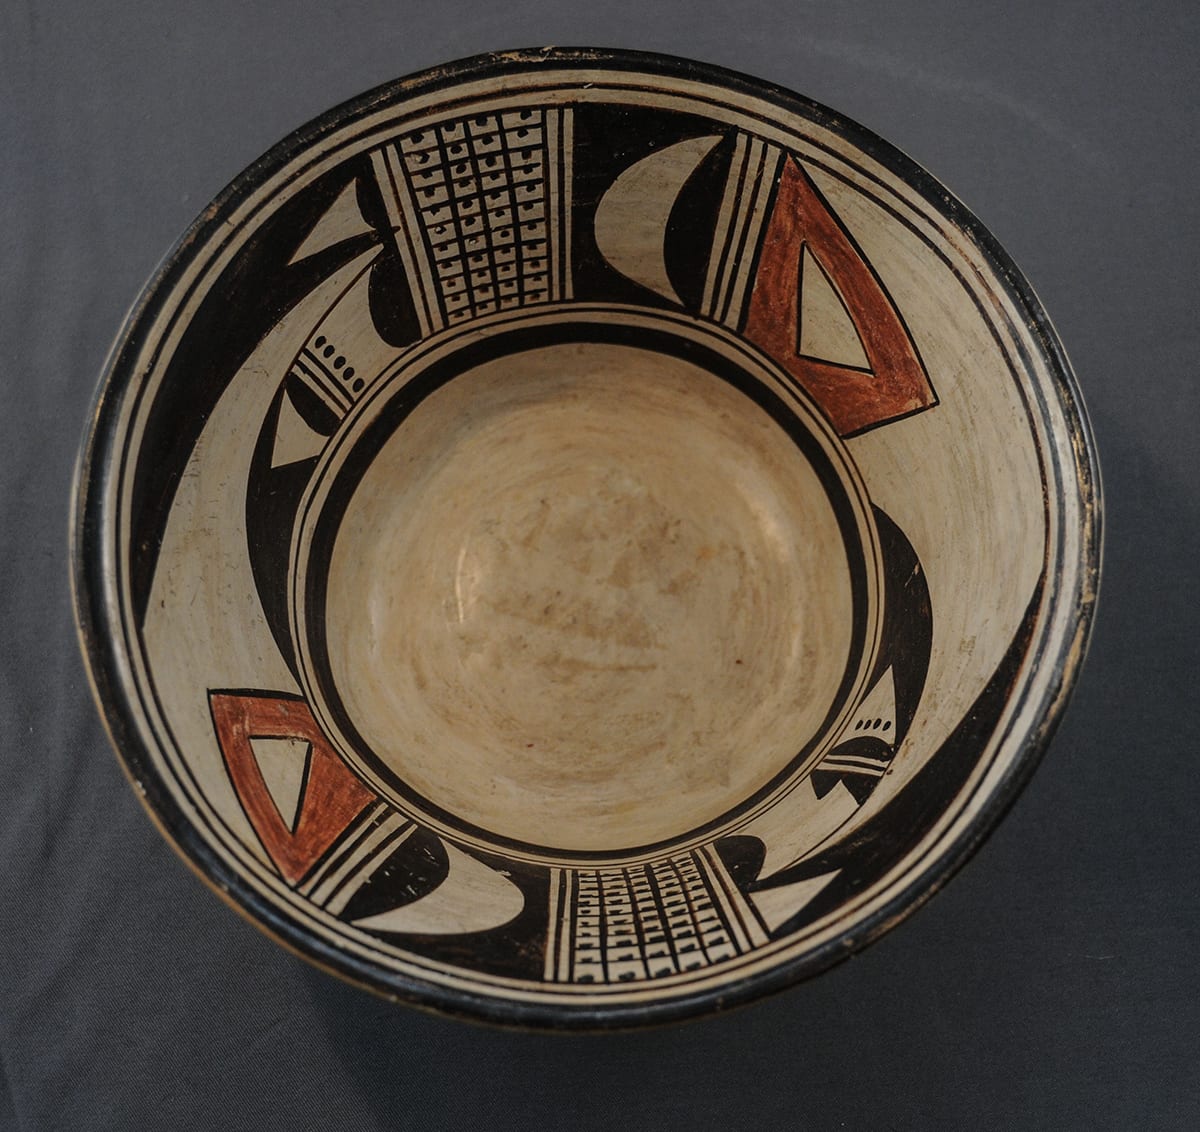 2012-25 Conical bowl with “NAMpyuo” signature